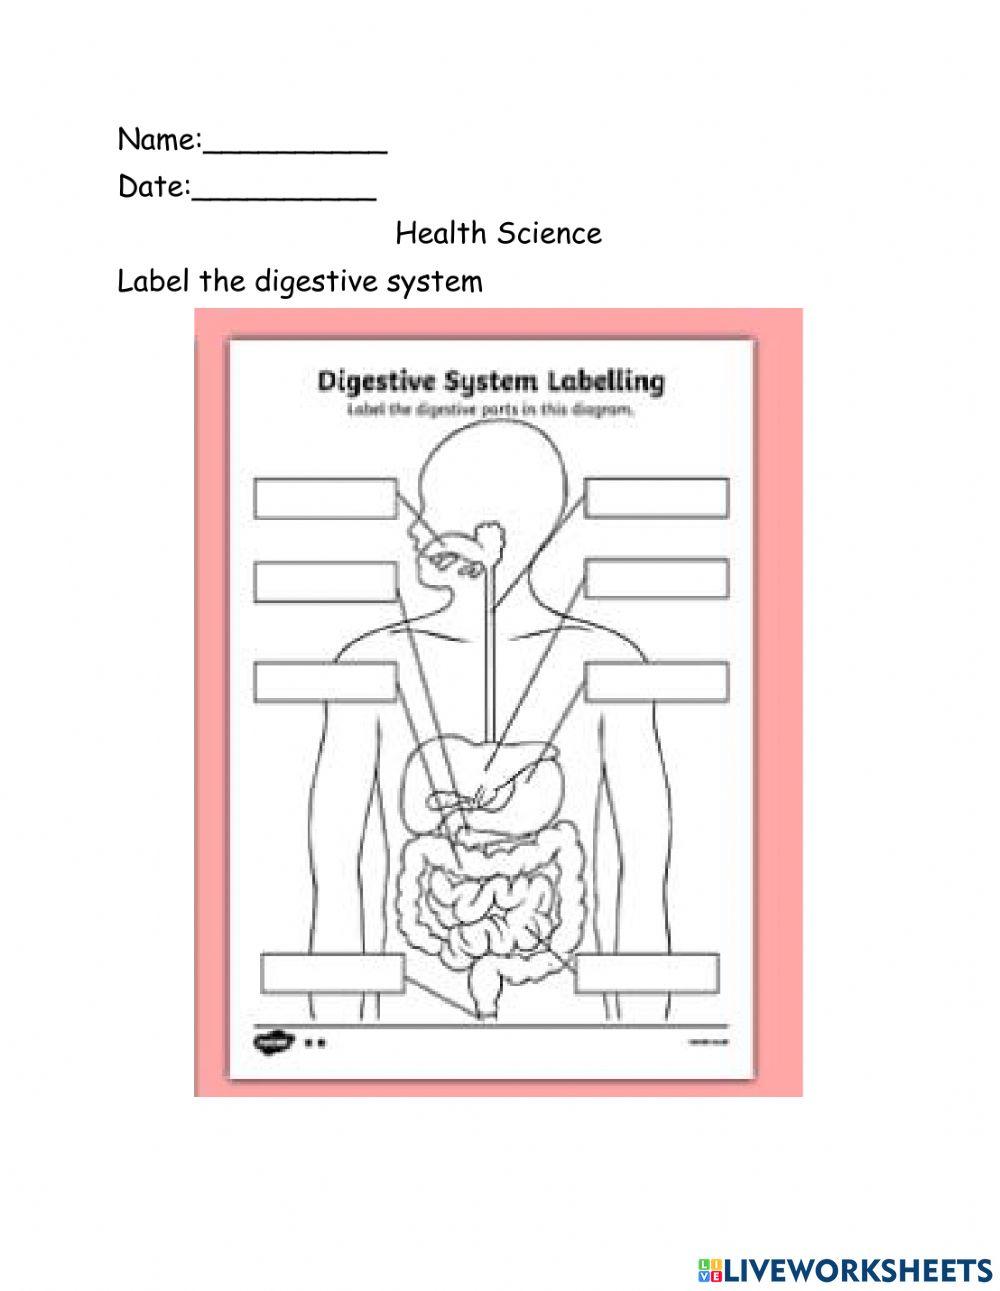 The digestive System